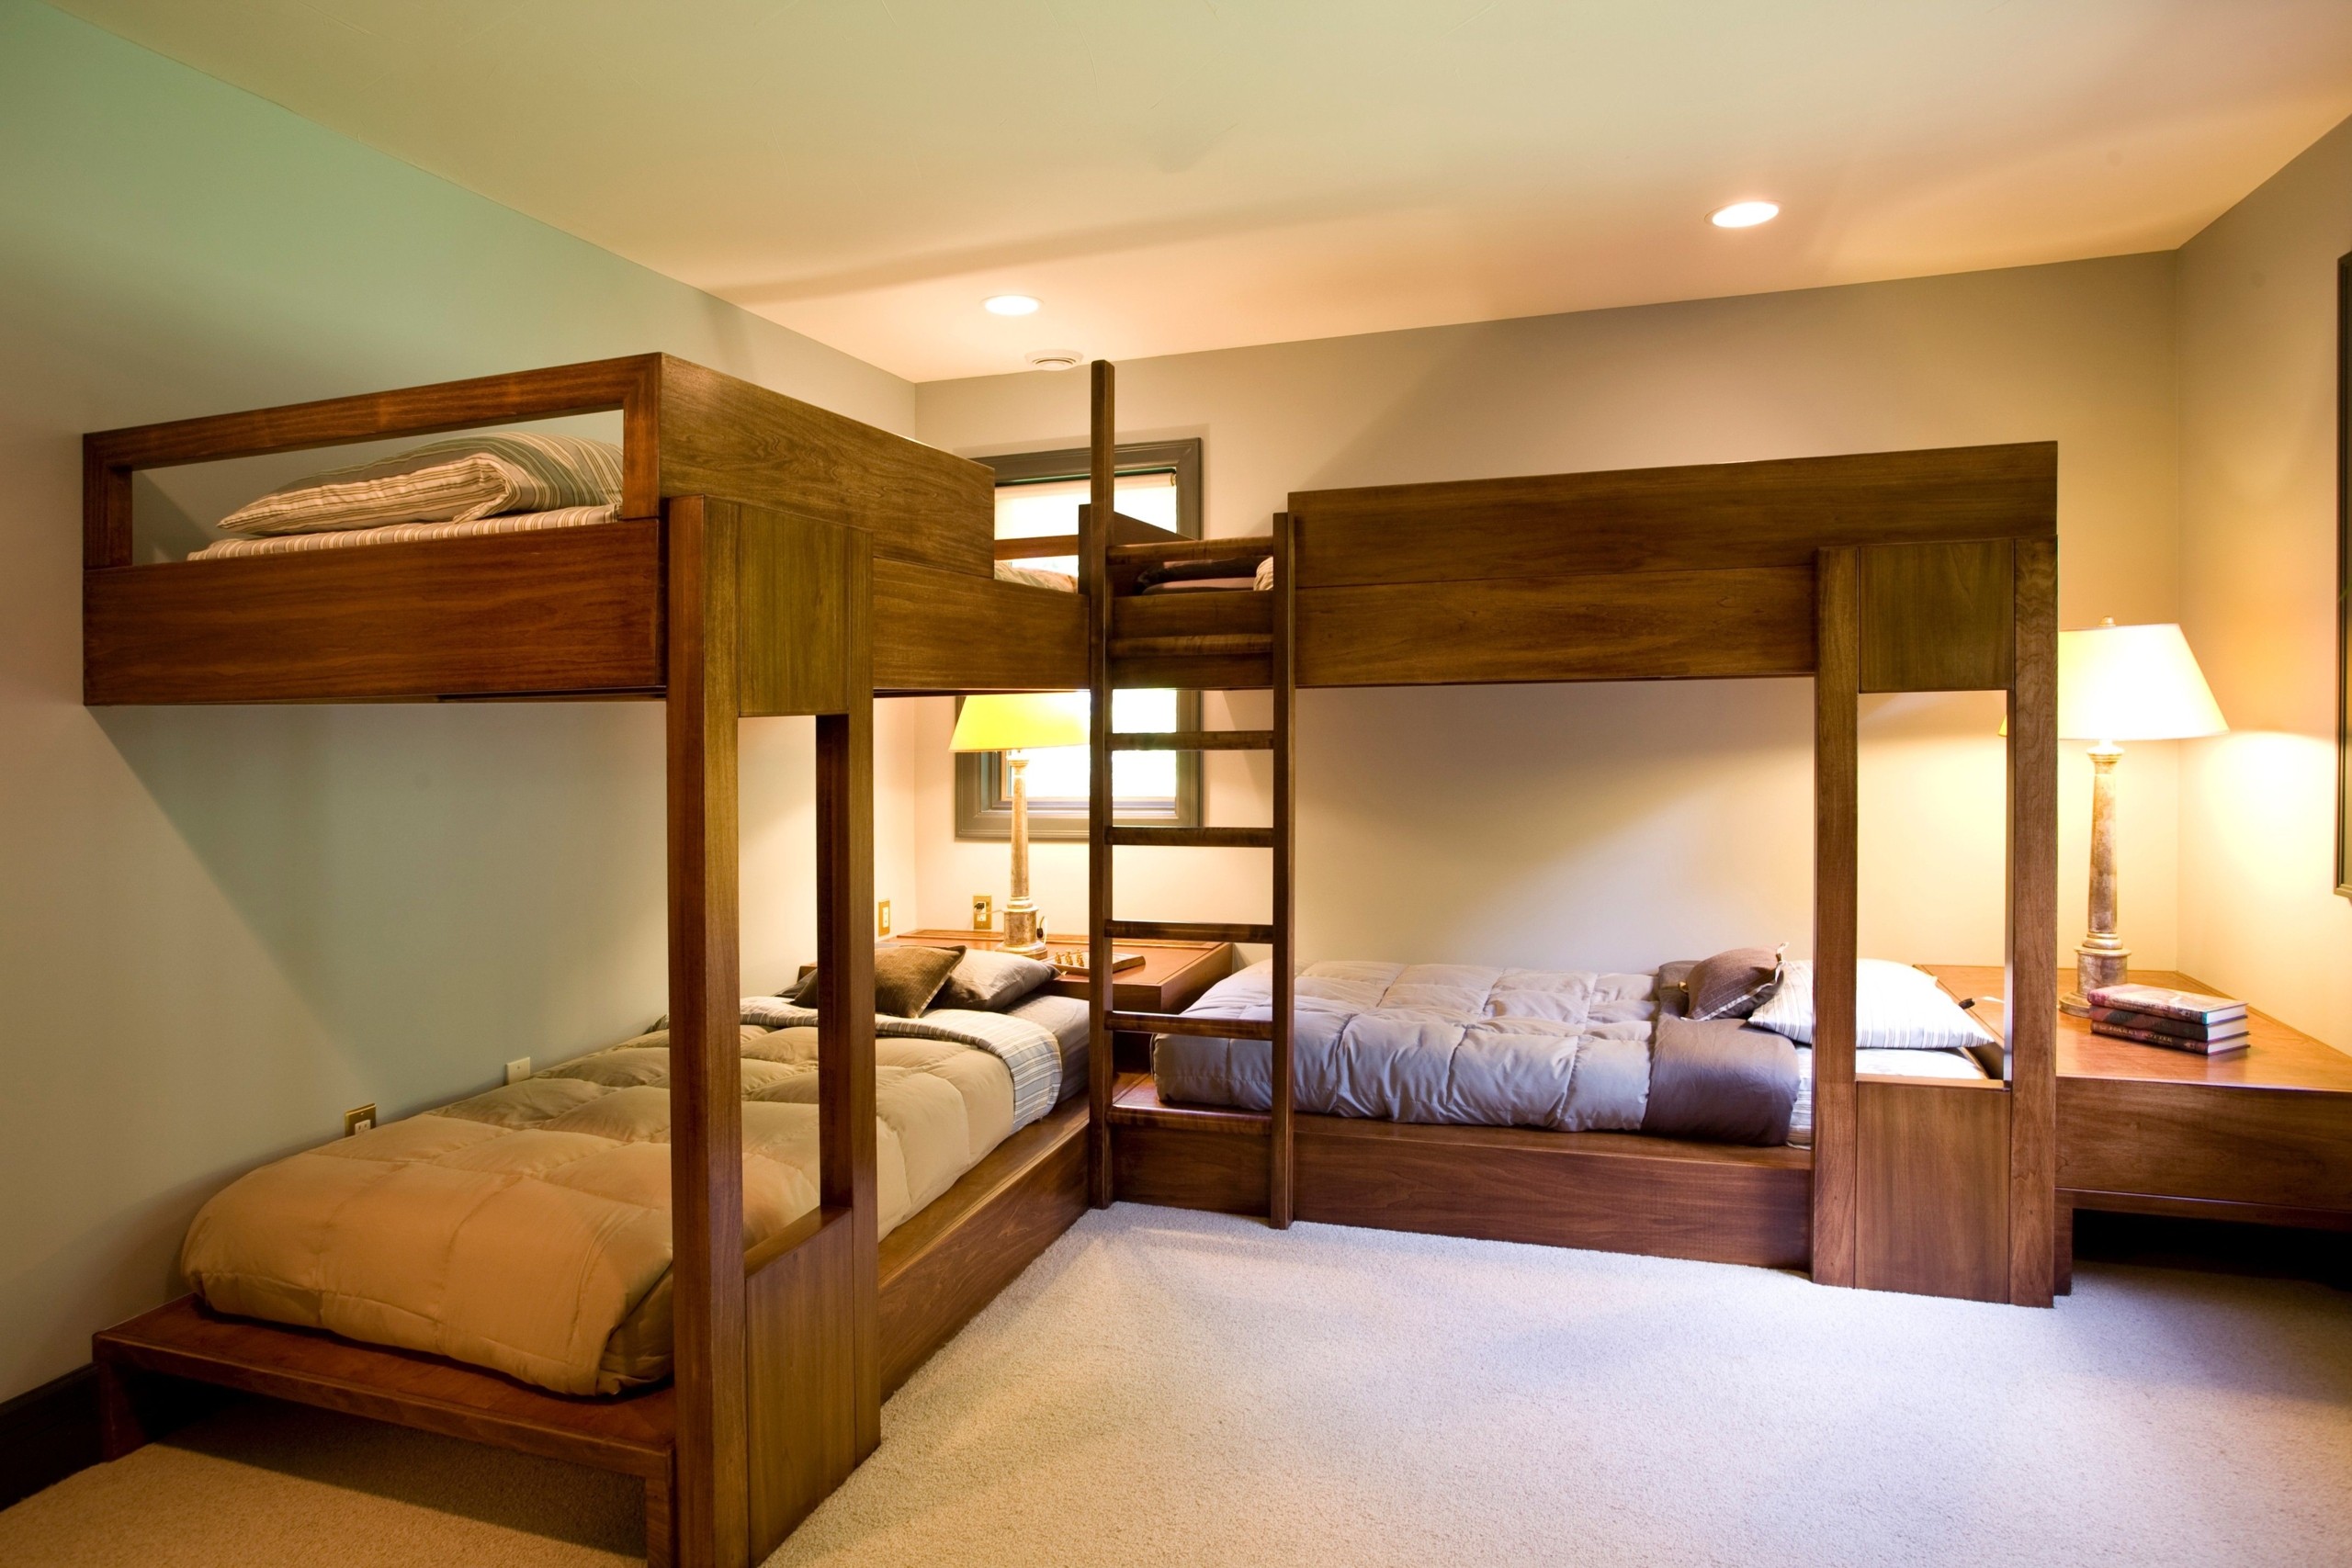 L shaped bunk bed for kid's room or teenager's room. 